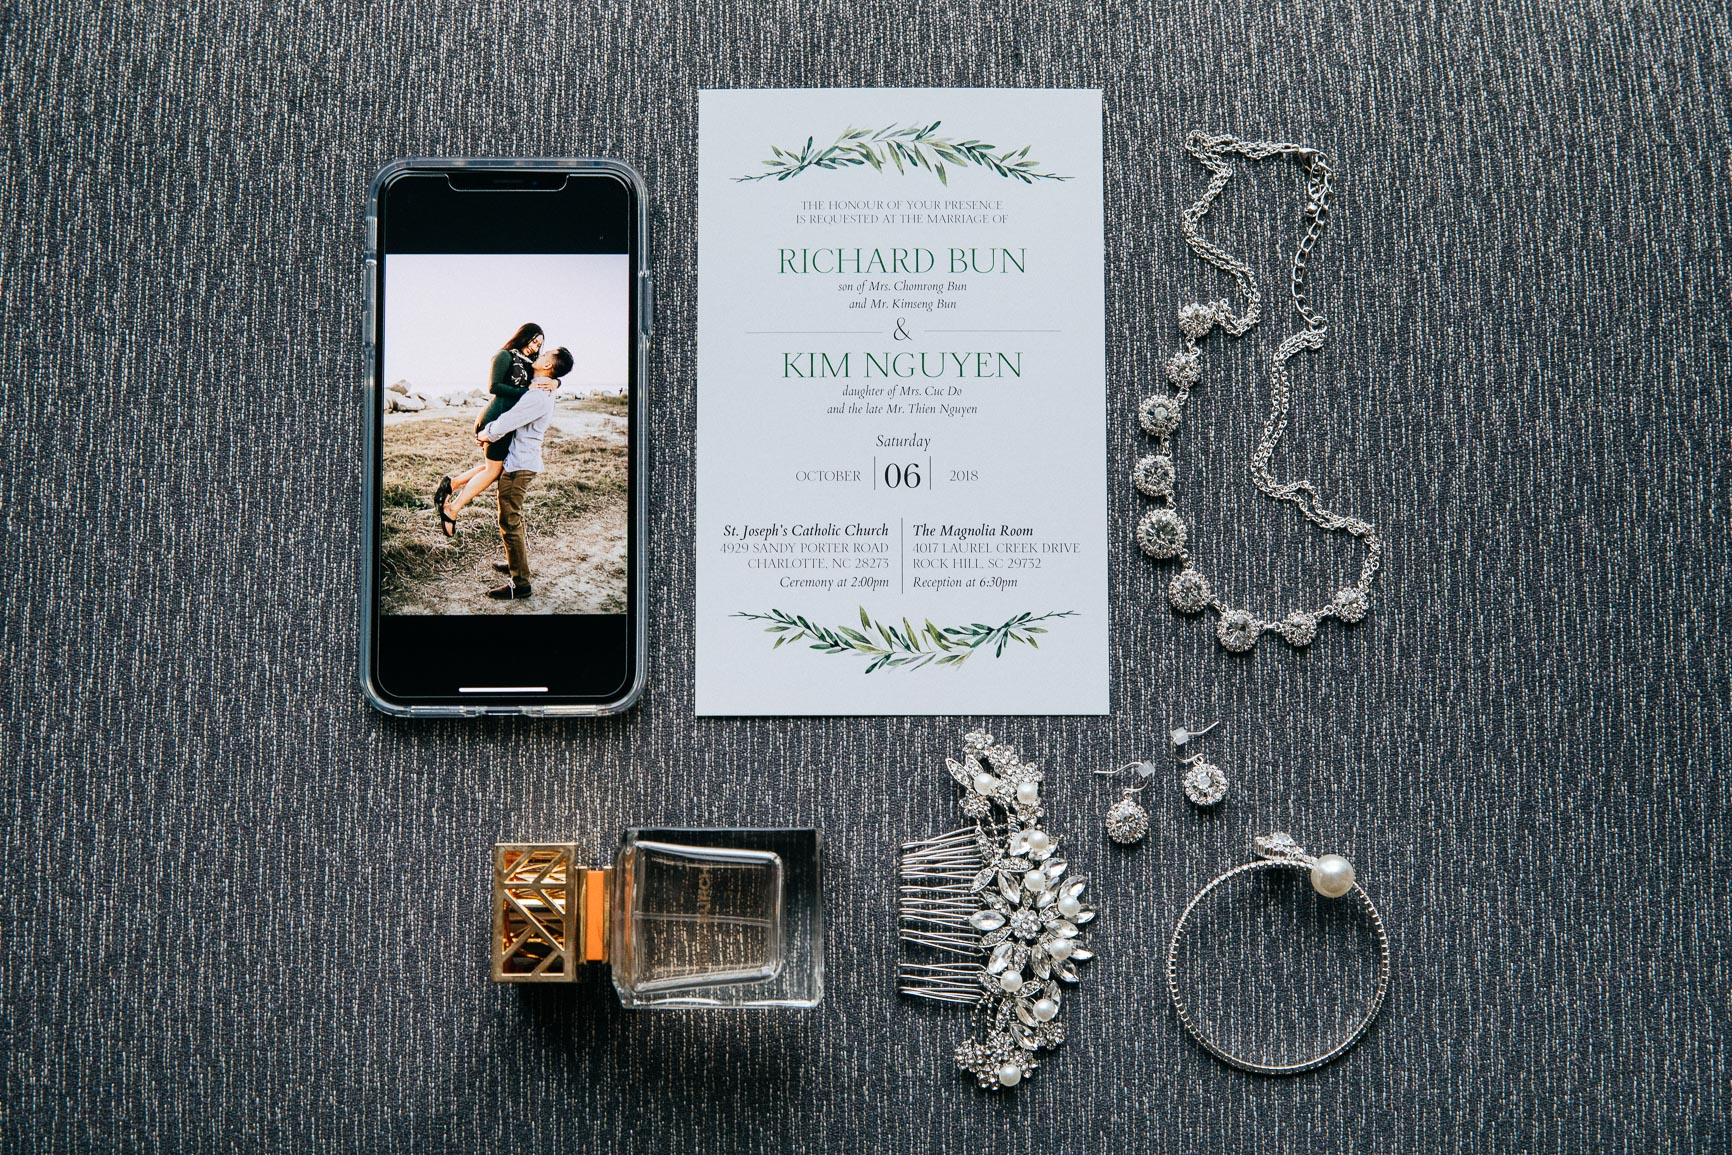 how to plan a photo worthy wedding by nhieu tang photography, bride and groom detail shots, wedding invitation details, wedding day flat lay, wedding by nhieu tang photography, charlotte wedding photographer, best charlotte wedding photographer | nhieutang.com